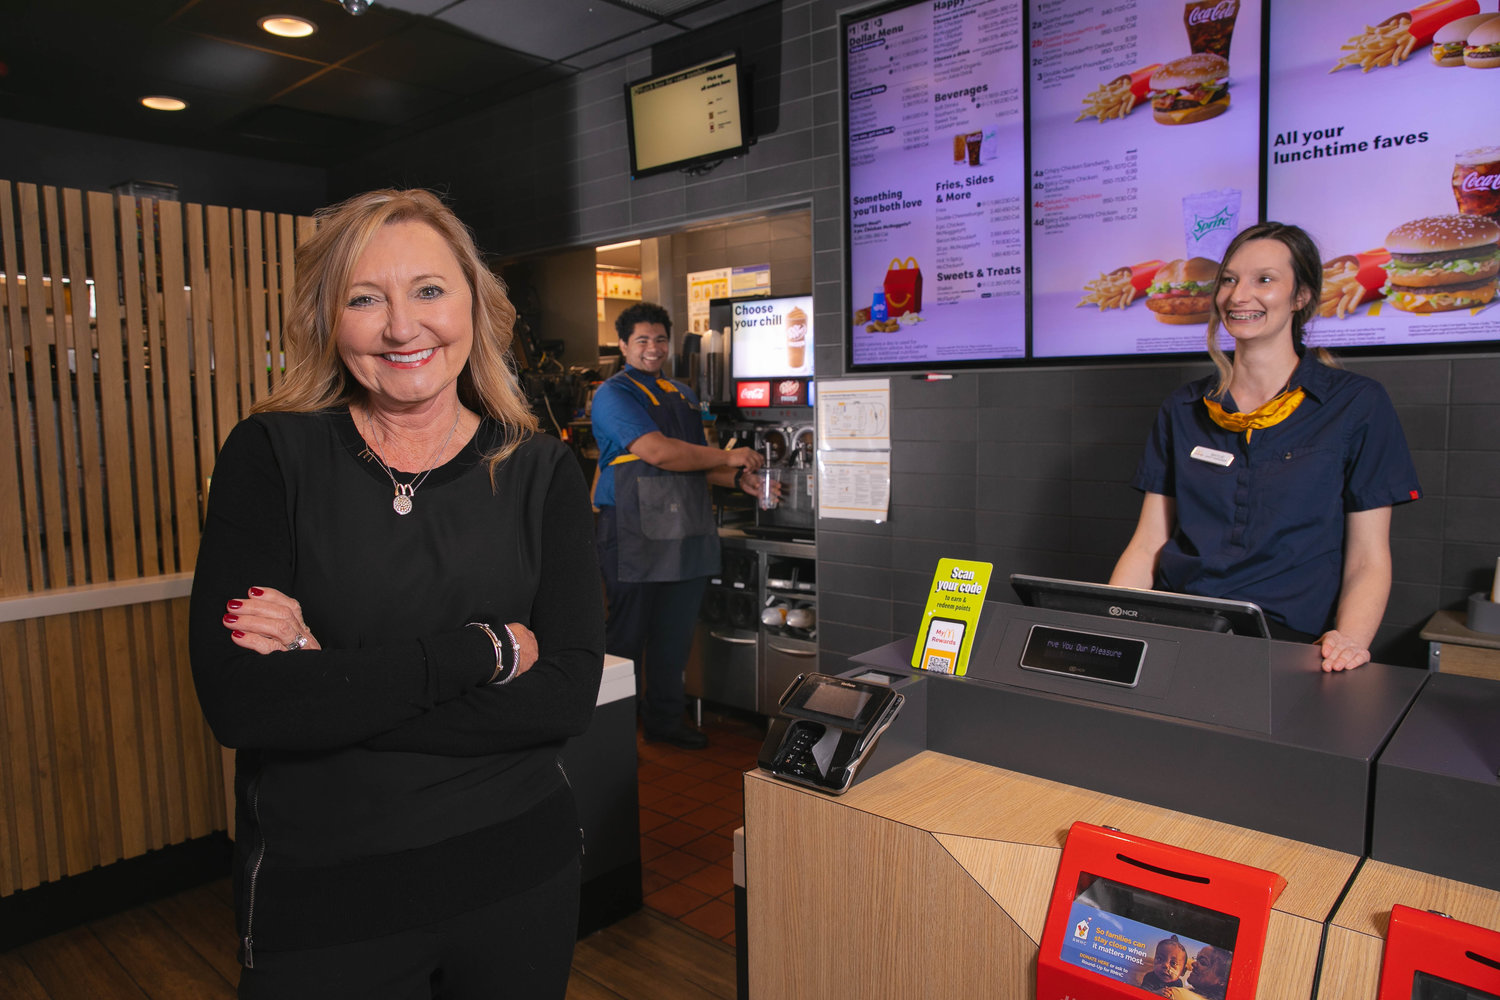 Missouri's recent minimum wage hike happened simultaneously with a worker shortage that drove up pay. McDonald's co-owner Teresa McGeehan, left, says compression was the big complication for her company.